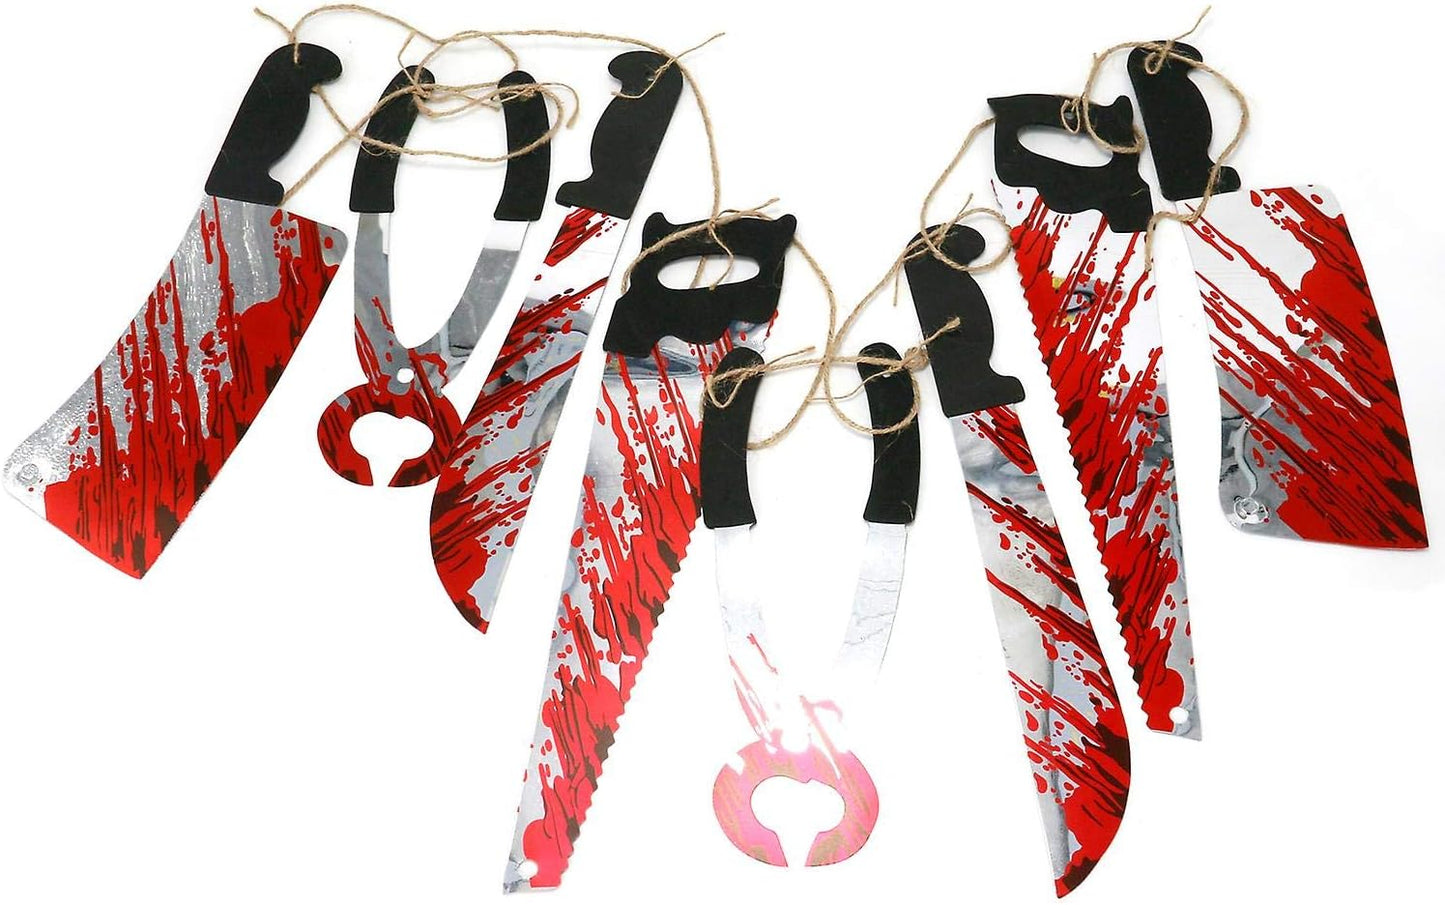 8Pcs Halloween Bloody Weapons Garland 8ft Spooky Bunting Banner for Horror Props